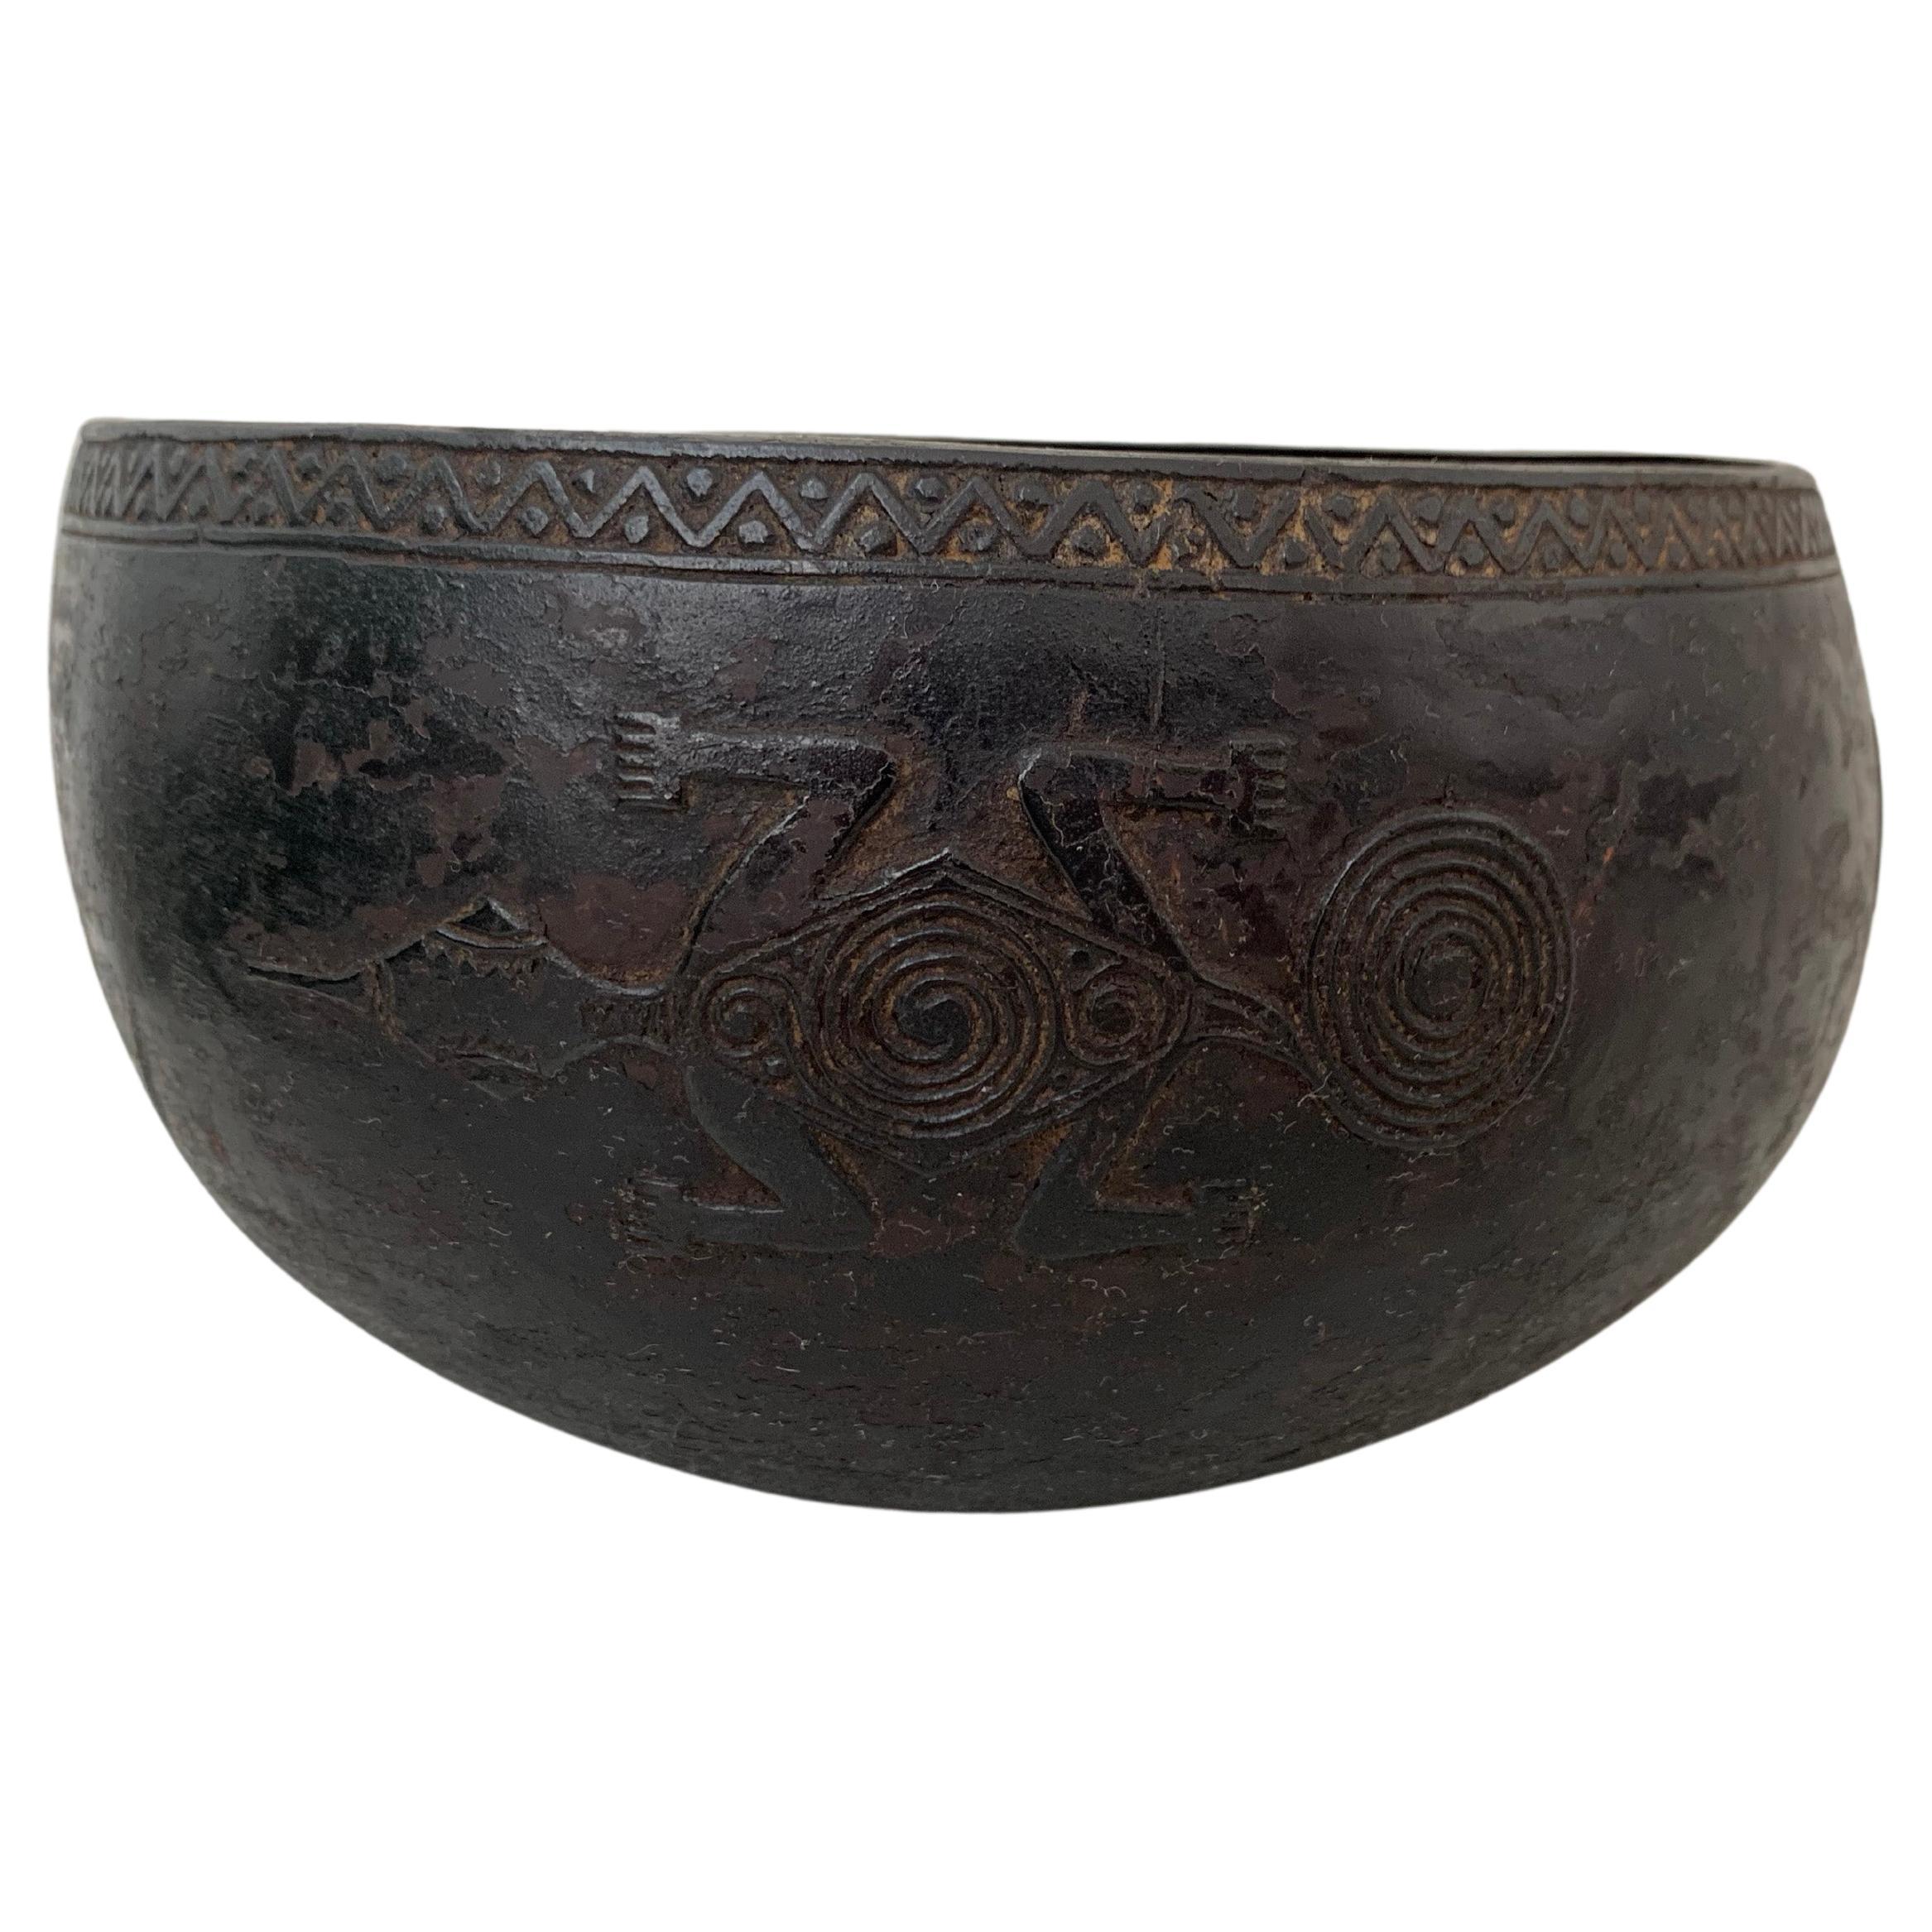 Coconut Shell Engraved Tribal Bowl from Nias, Mentawai Islands, Indonesia